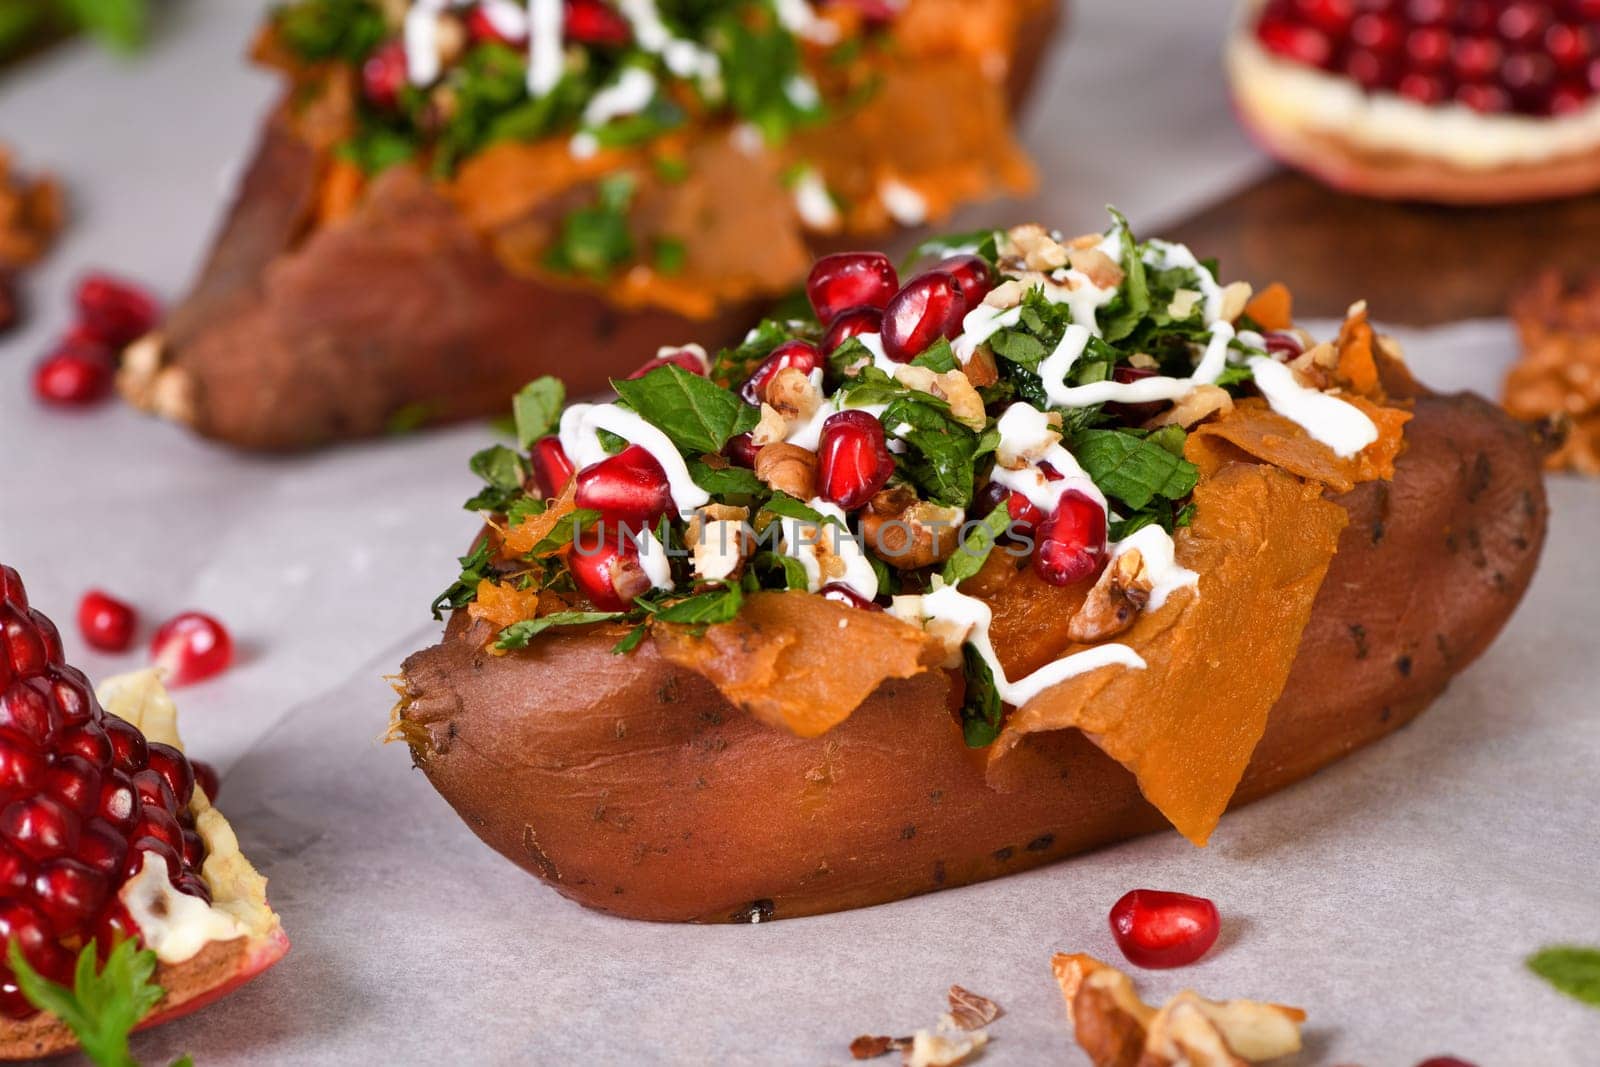 Baked stuffed sweet potatoes filled with walnuts, fresh herbs, mint and pomegranate seeds. The tahini sauce makes them excellent. It is a healthy side dish or main dish for vegans and paleo.